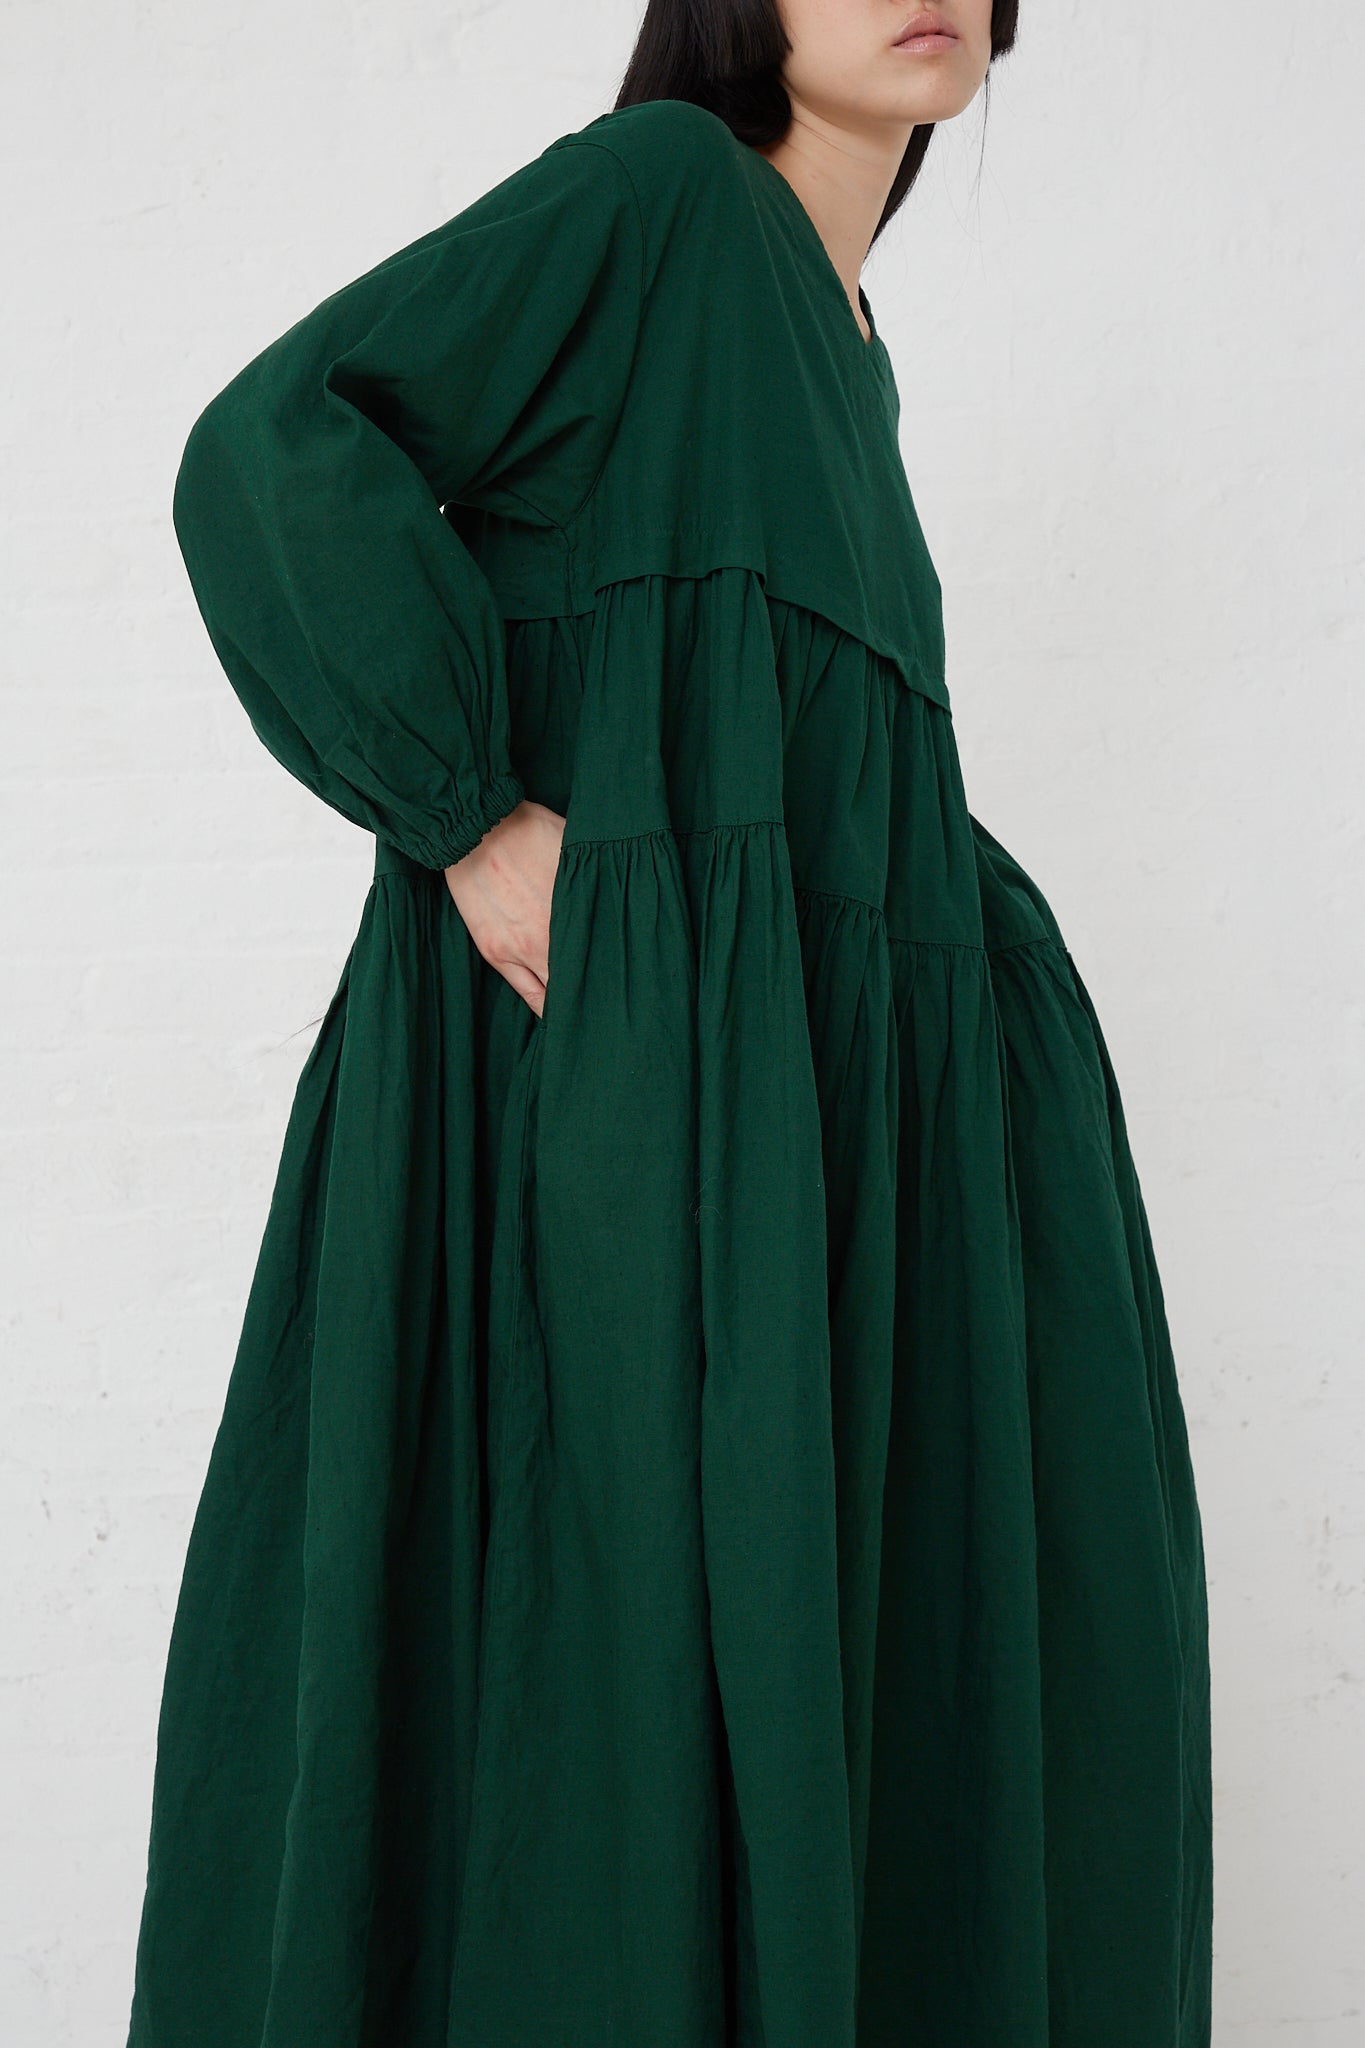 The model is wearing the UpcycleLino Linen Tiered Gather Dress in Green by nest Robe, made with ruffles.